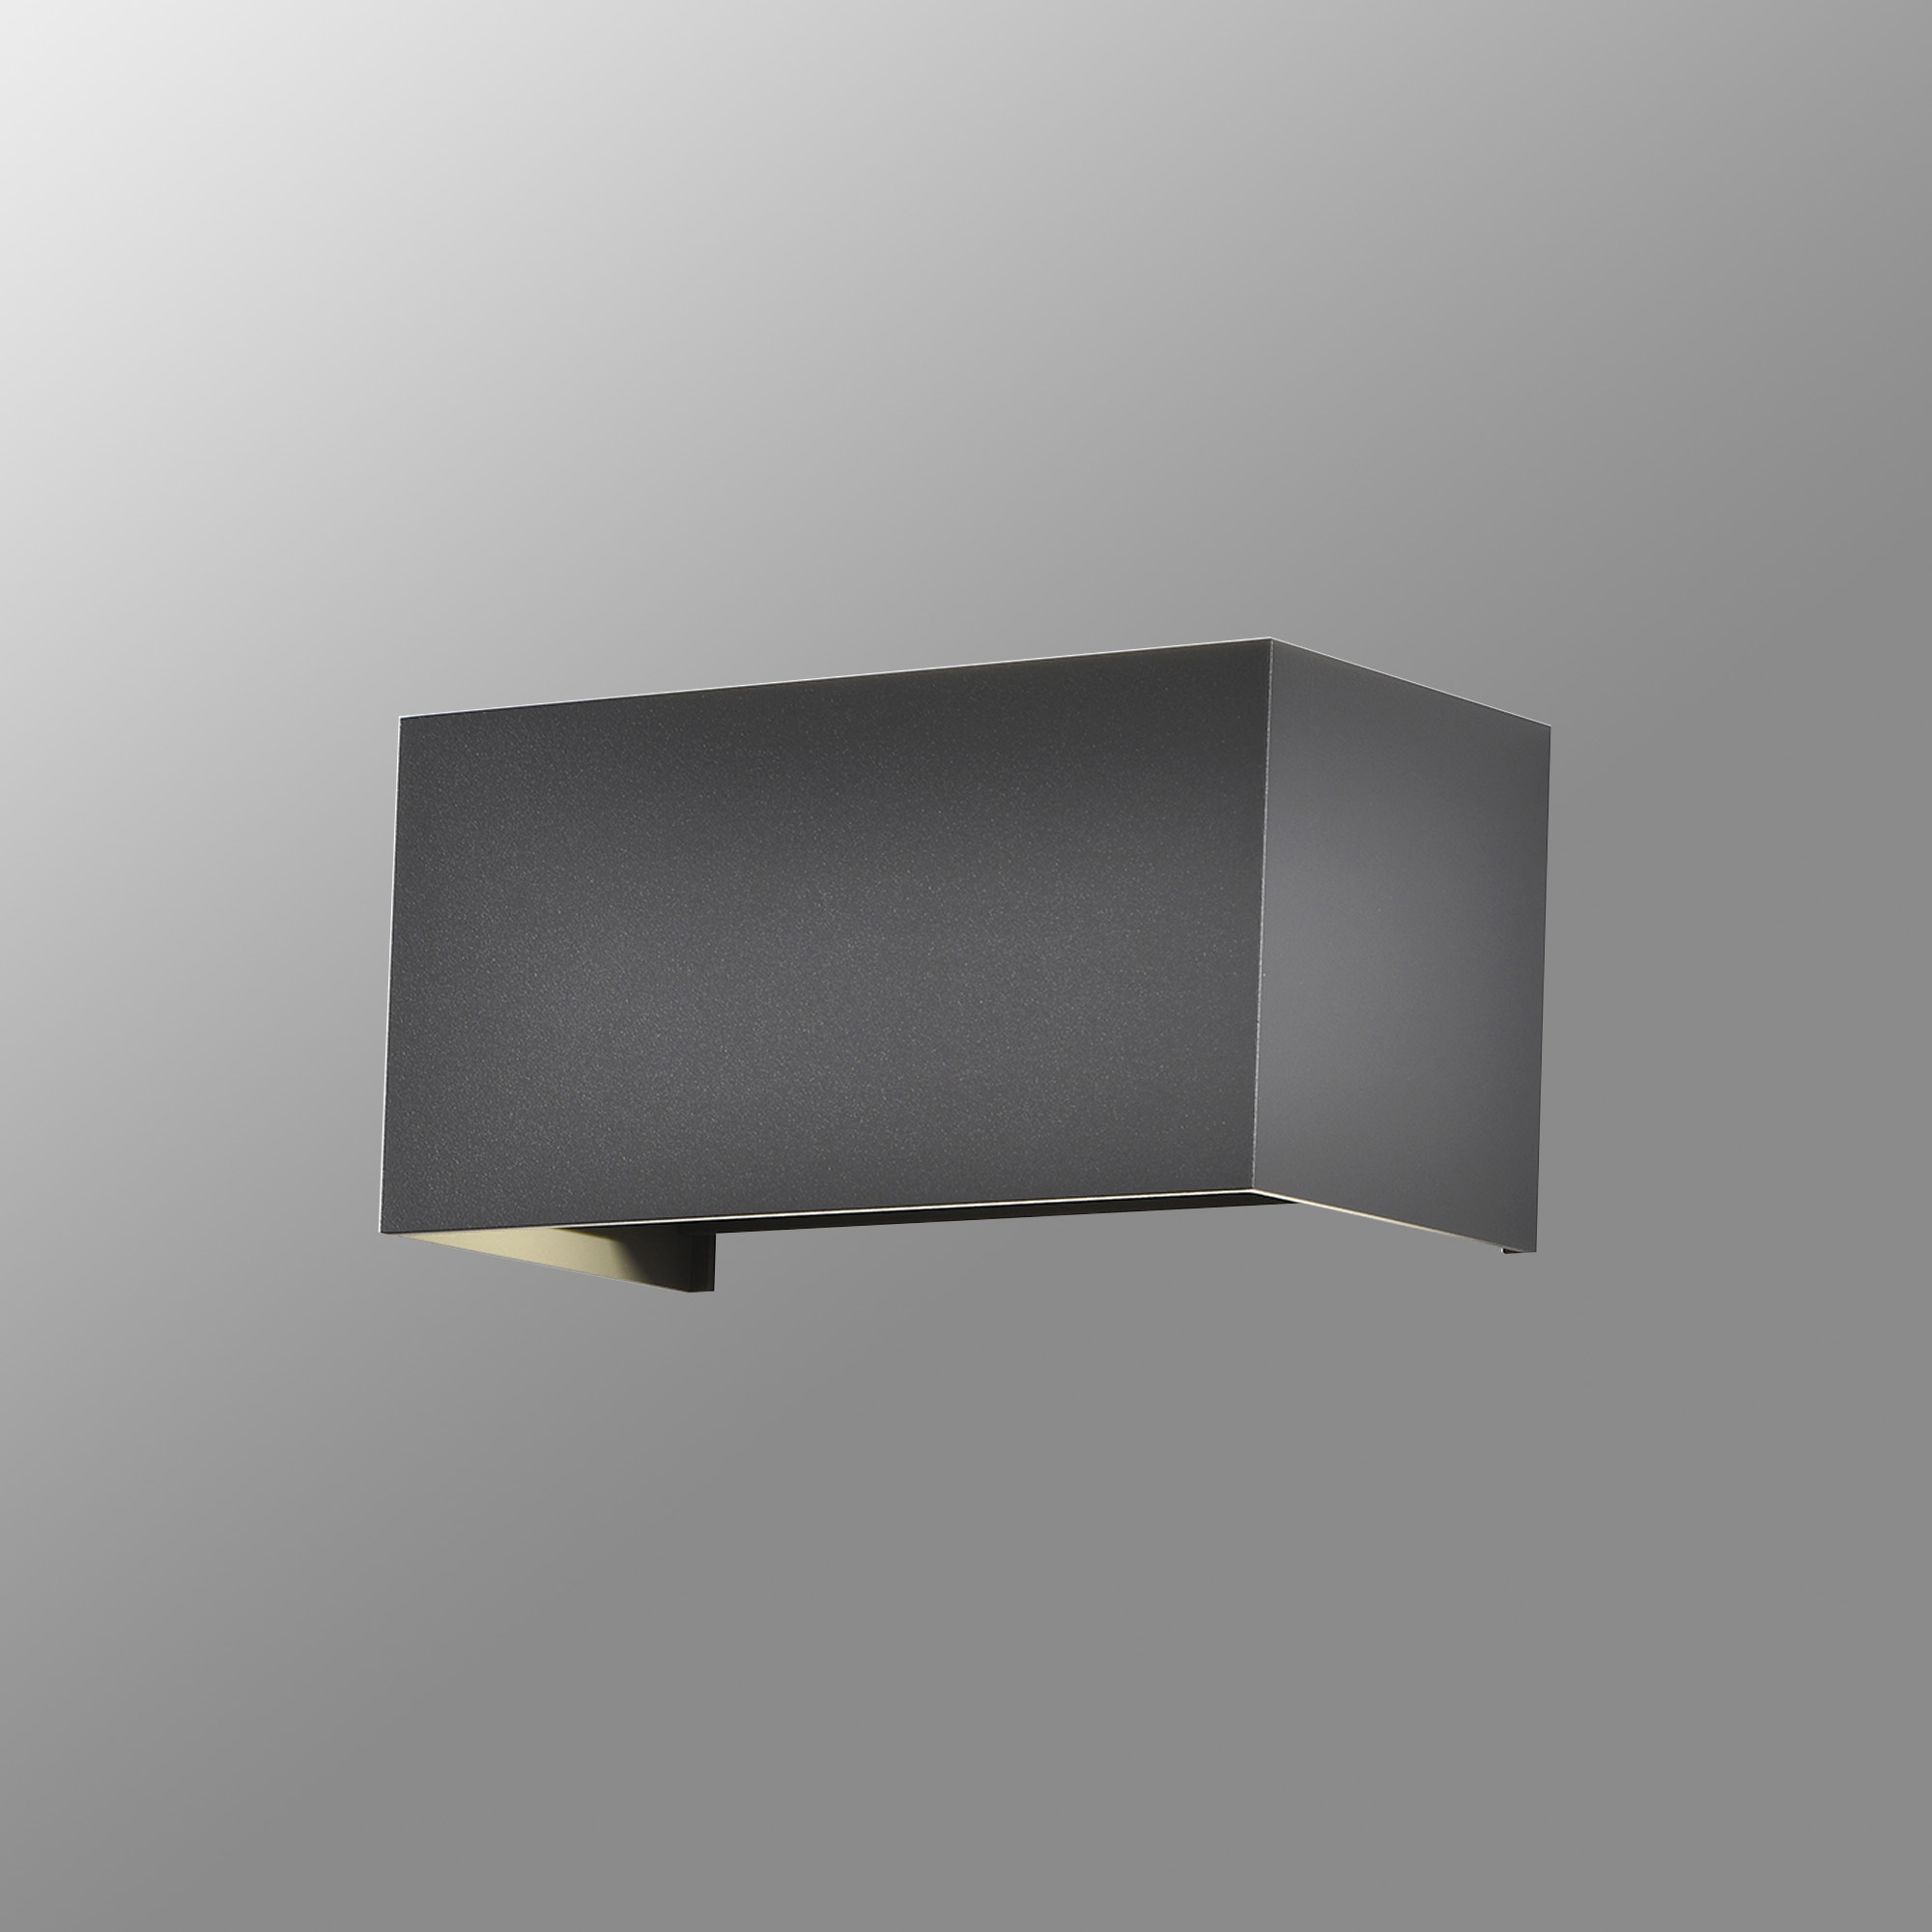 Davos Anthracite Exterior Lights Mantra Fusion Directional Wall Lights